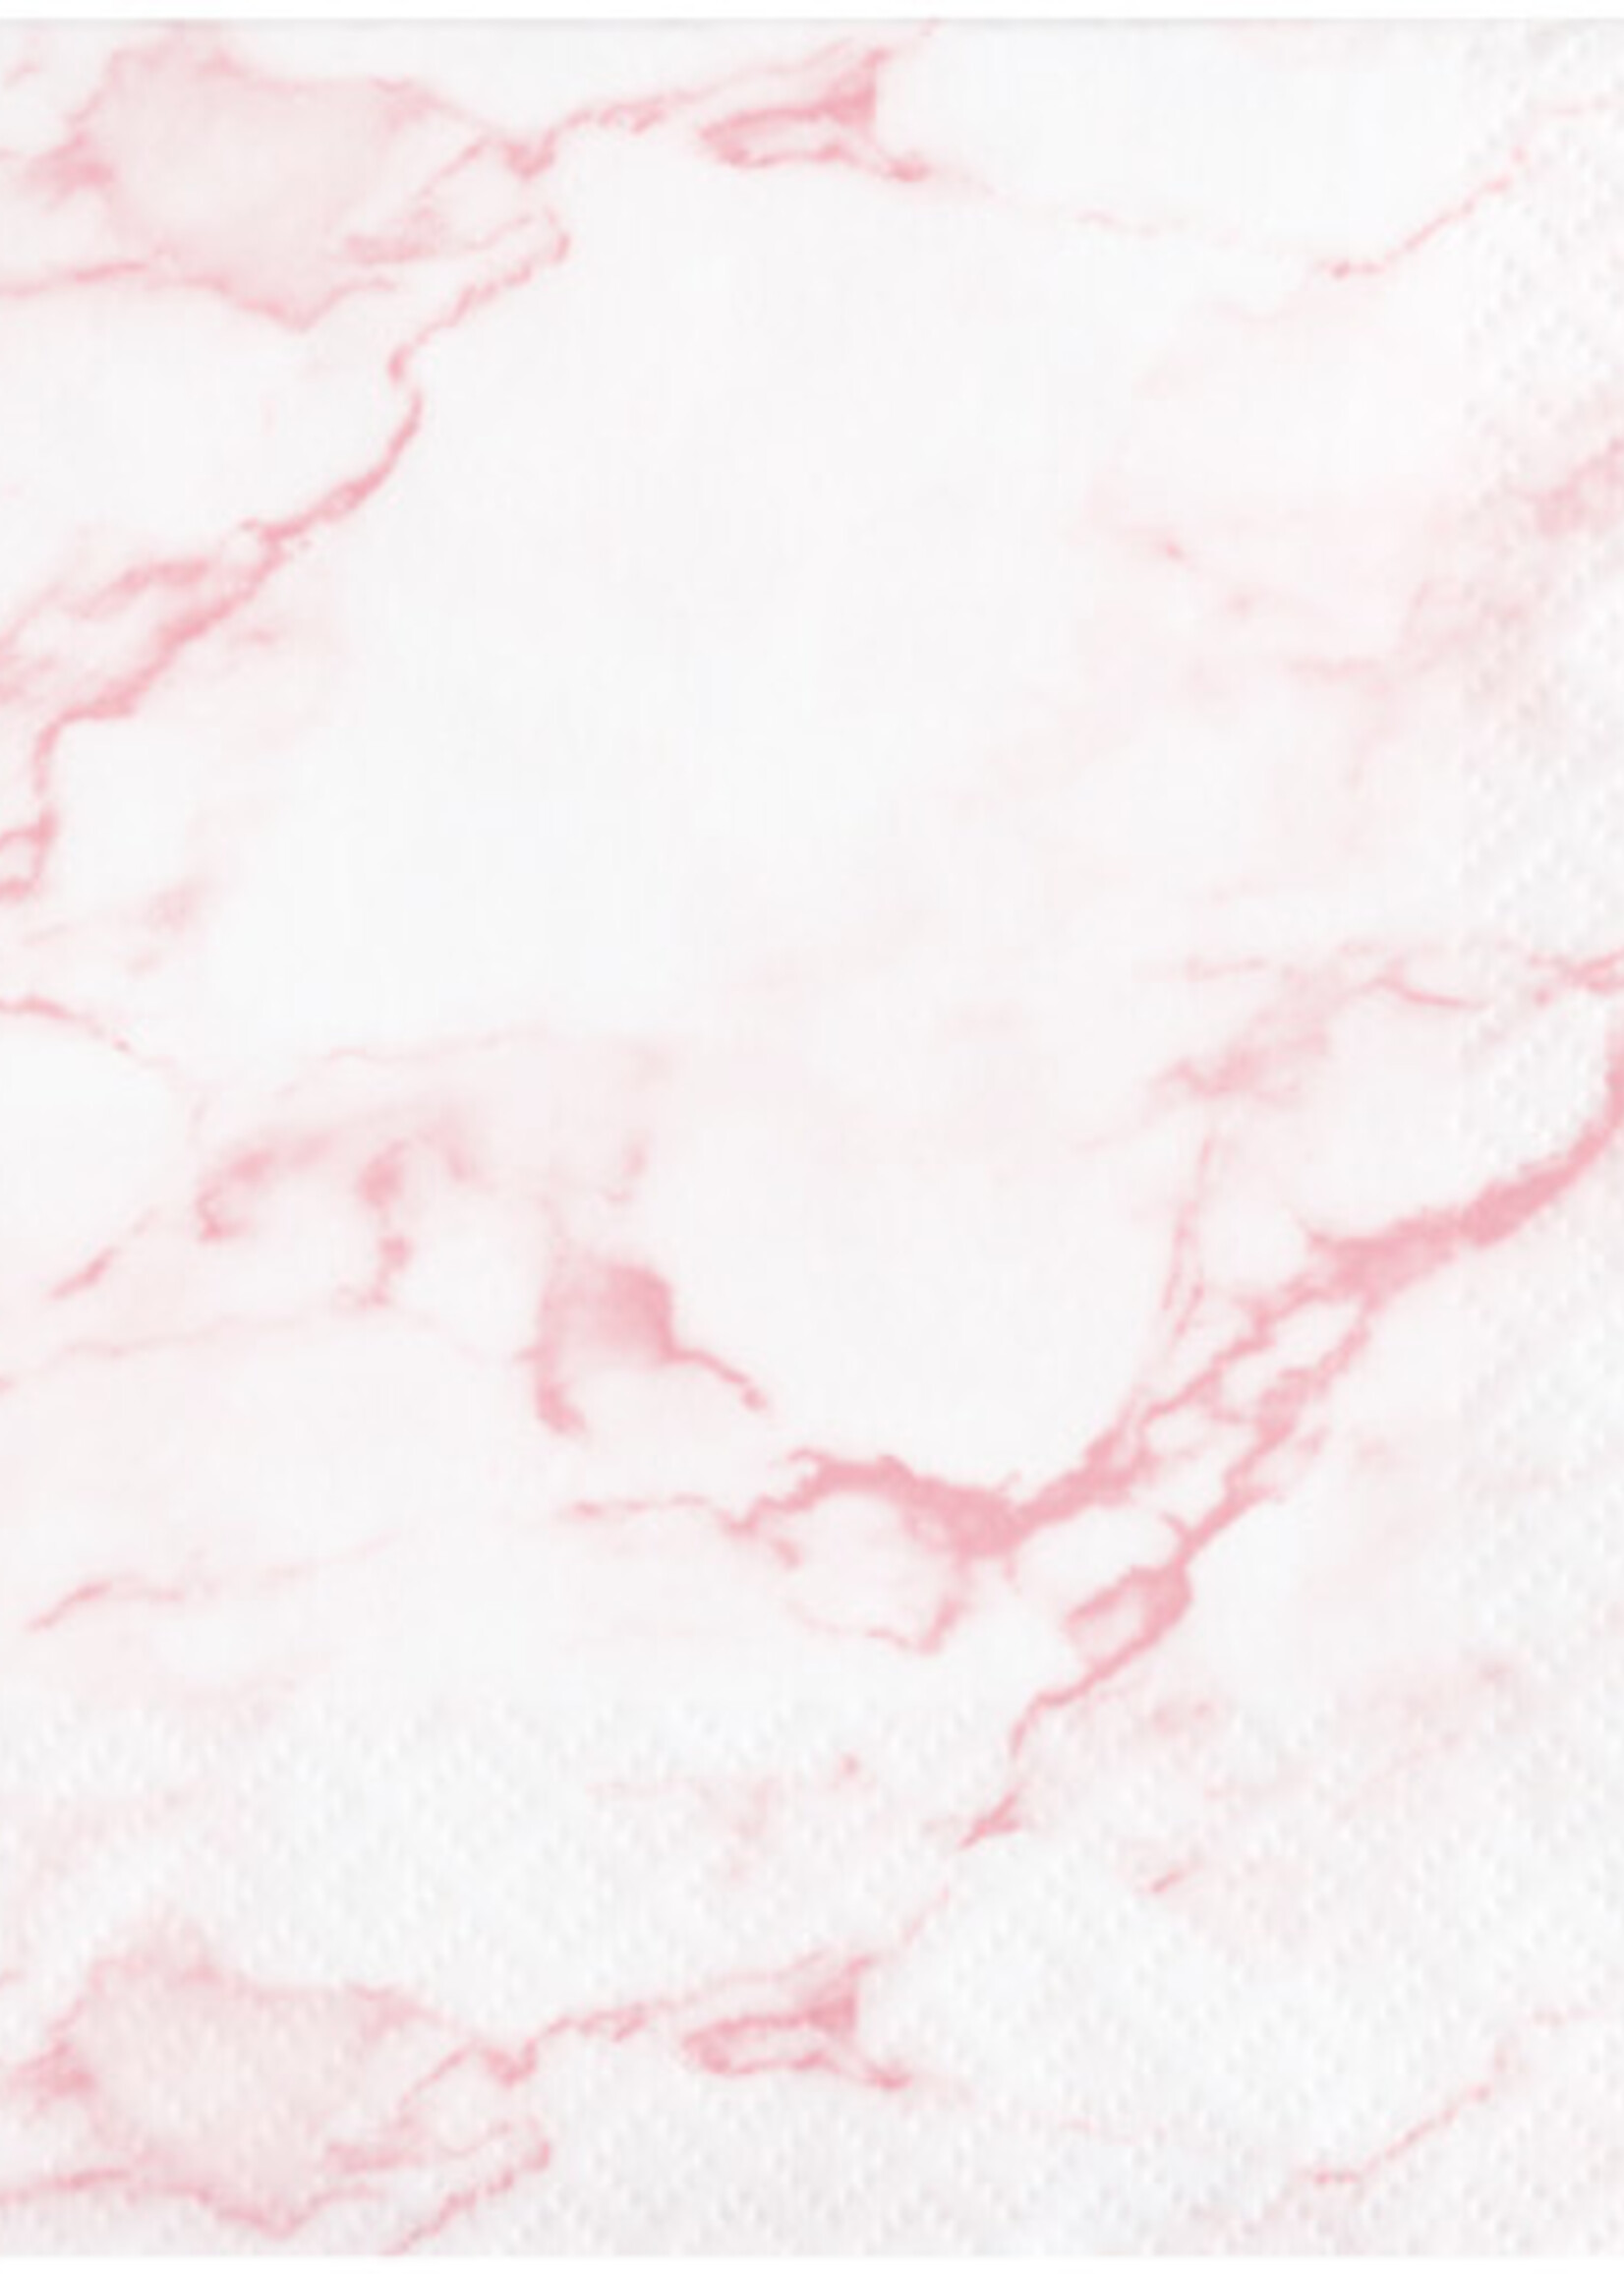 NAPKINS 16CT PINK MARBLE